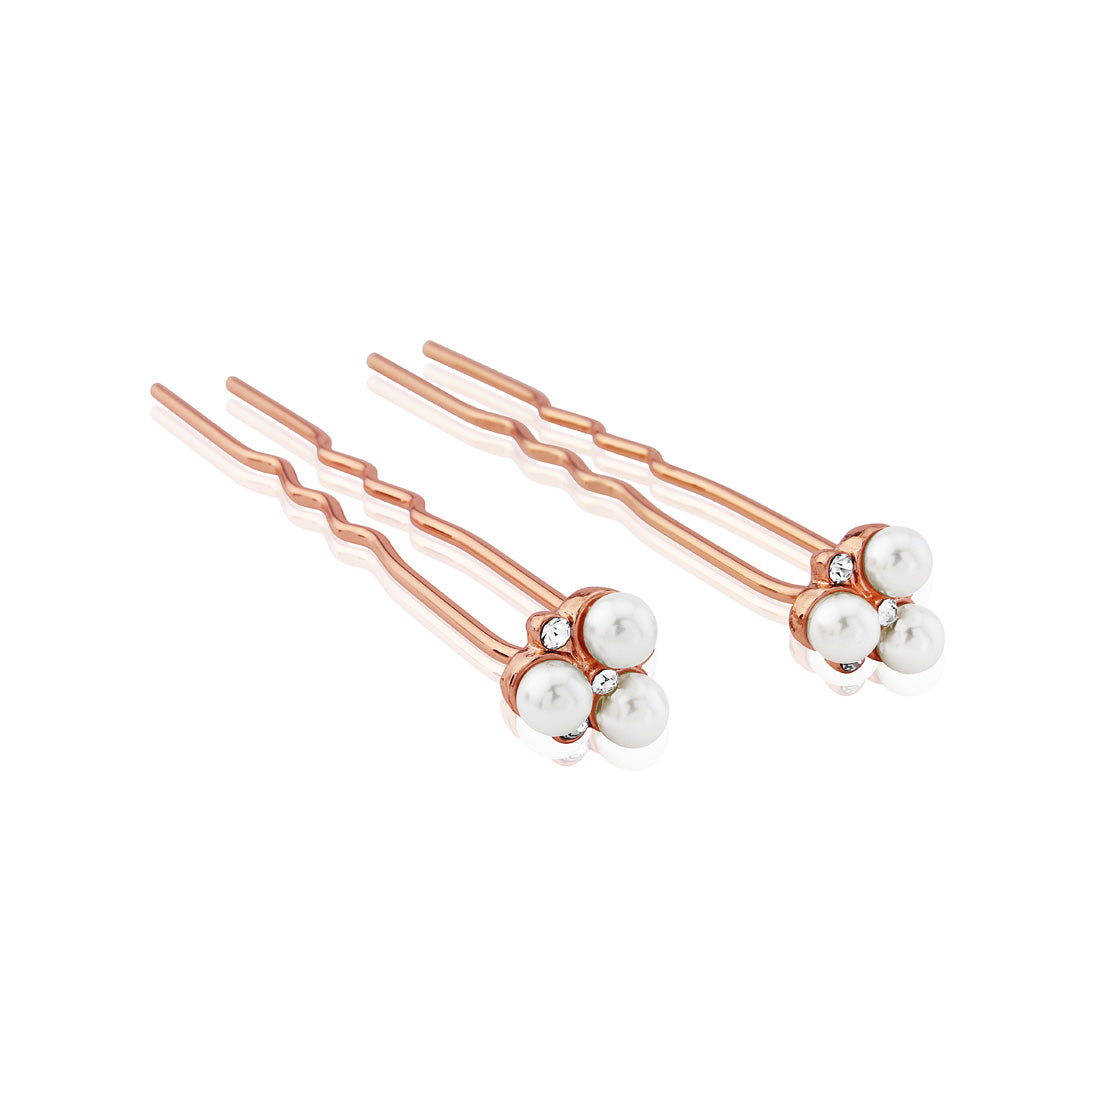 Shimmer of Rose Gold Pearl Cluster & Crystal Wedding Hair Pins - Pair